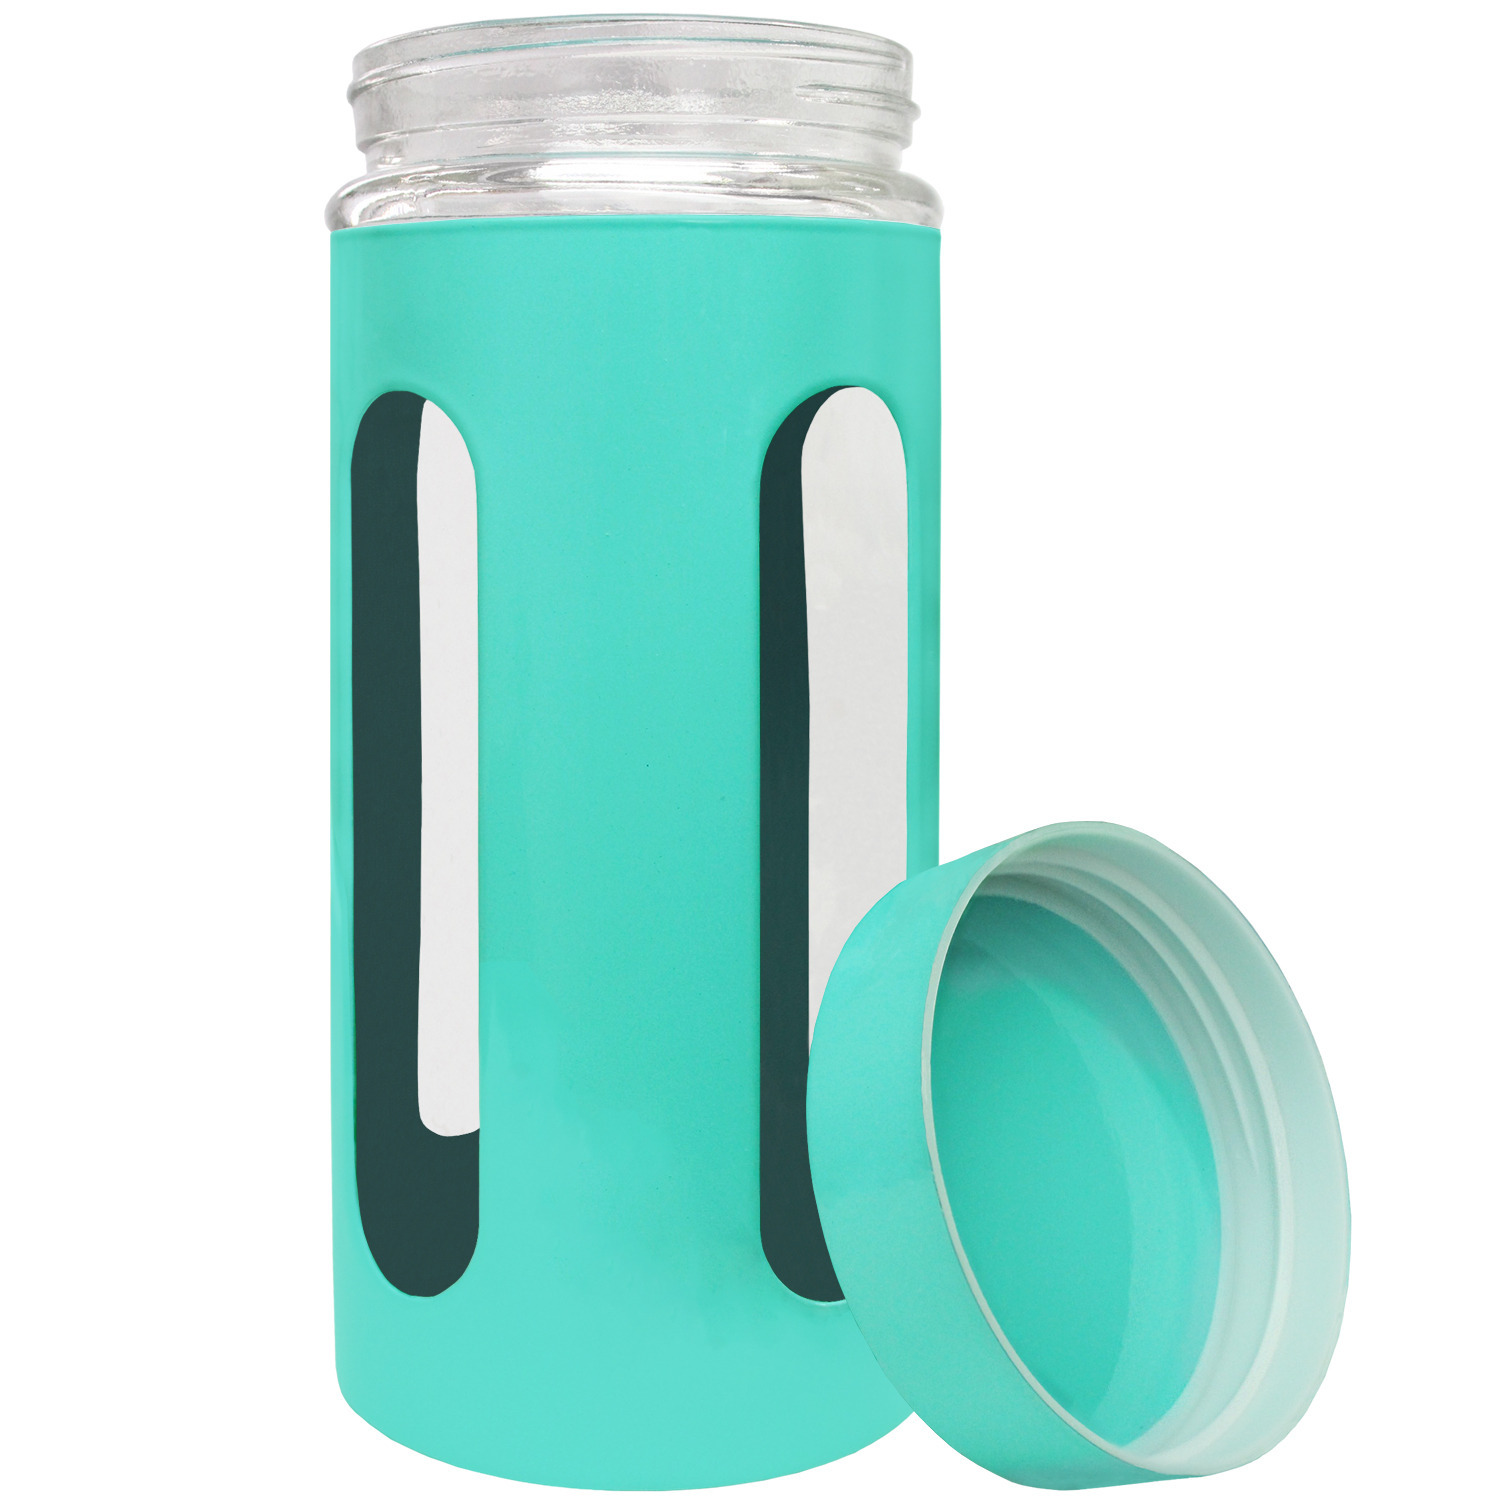 Blue Donuts 44oz Stainless Steel Canister with Window - Turquoise